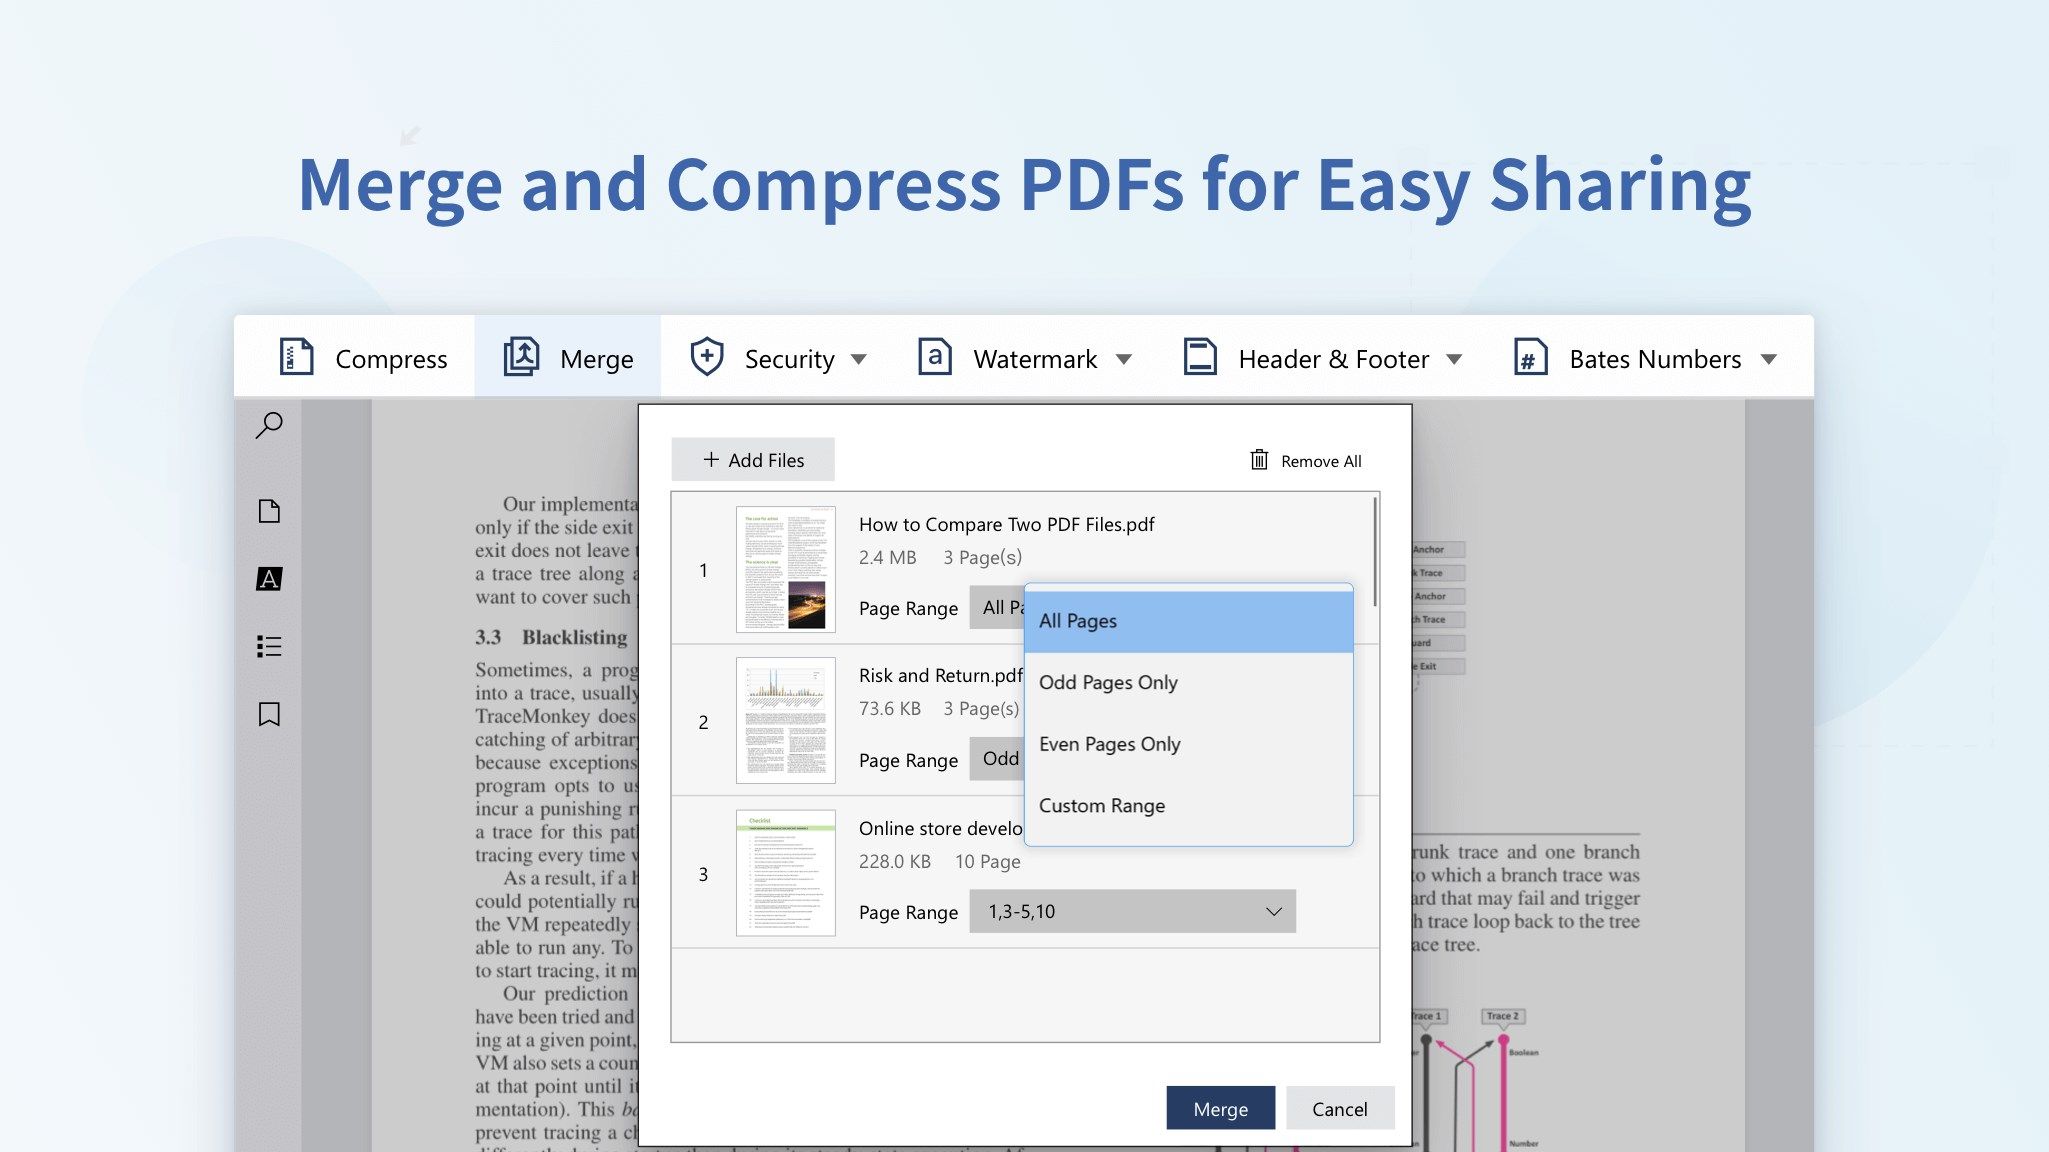 Merge and Compress PDFs for Easy Sharing